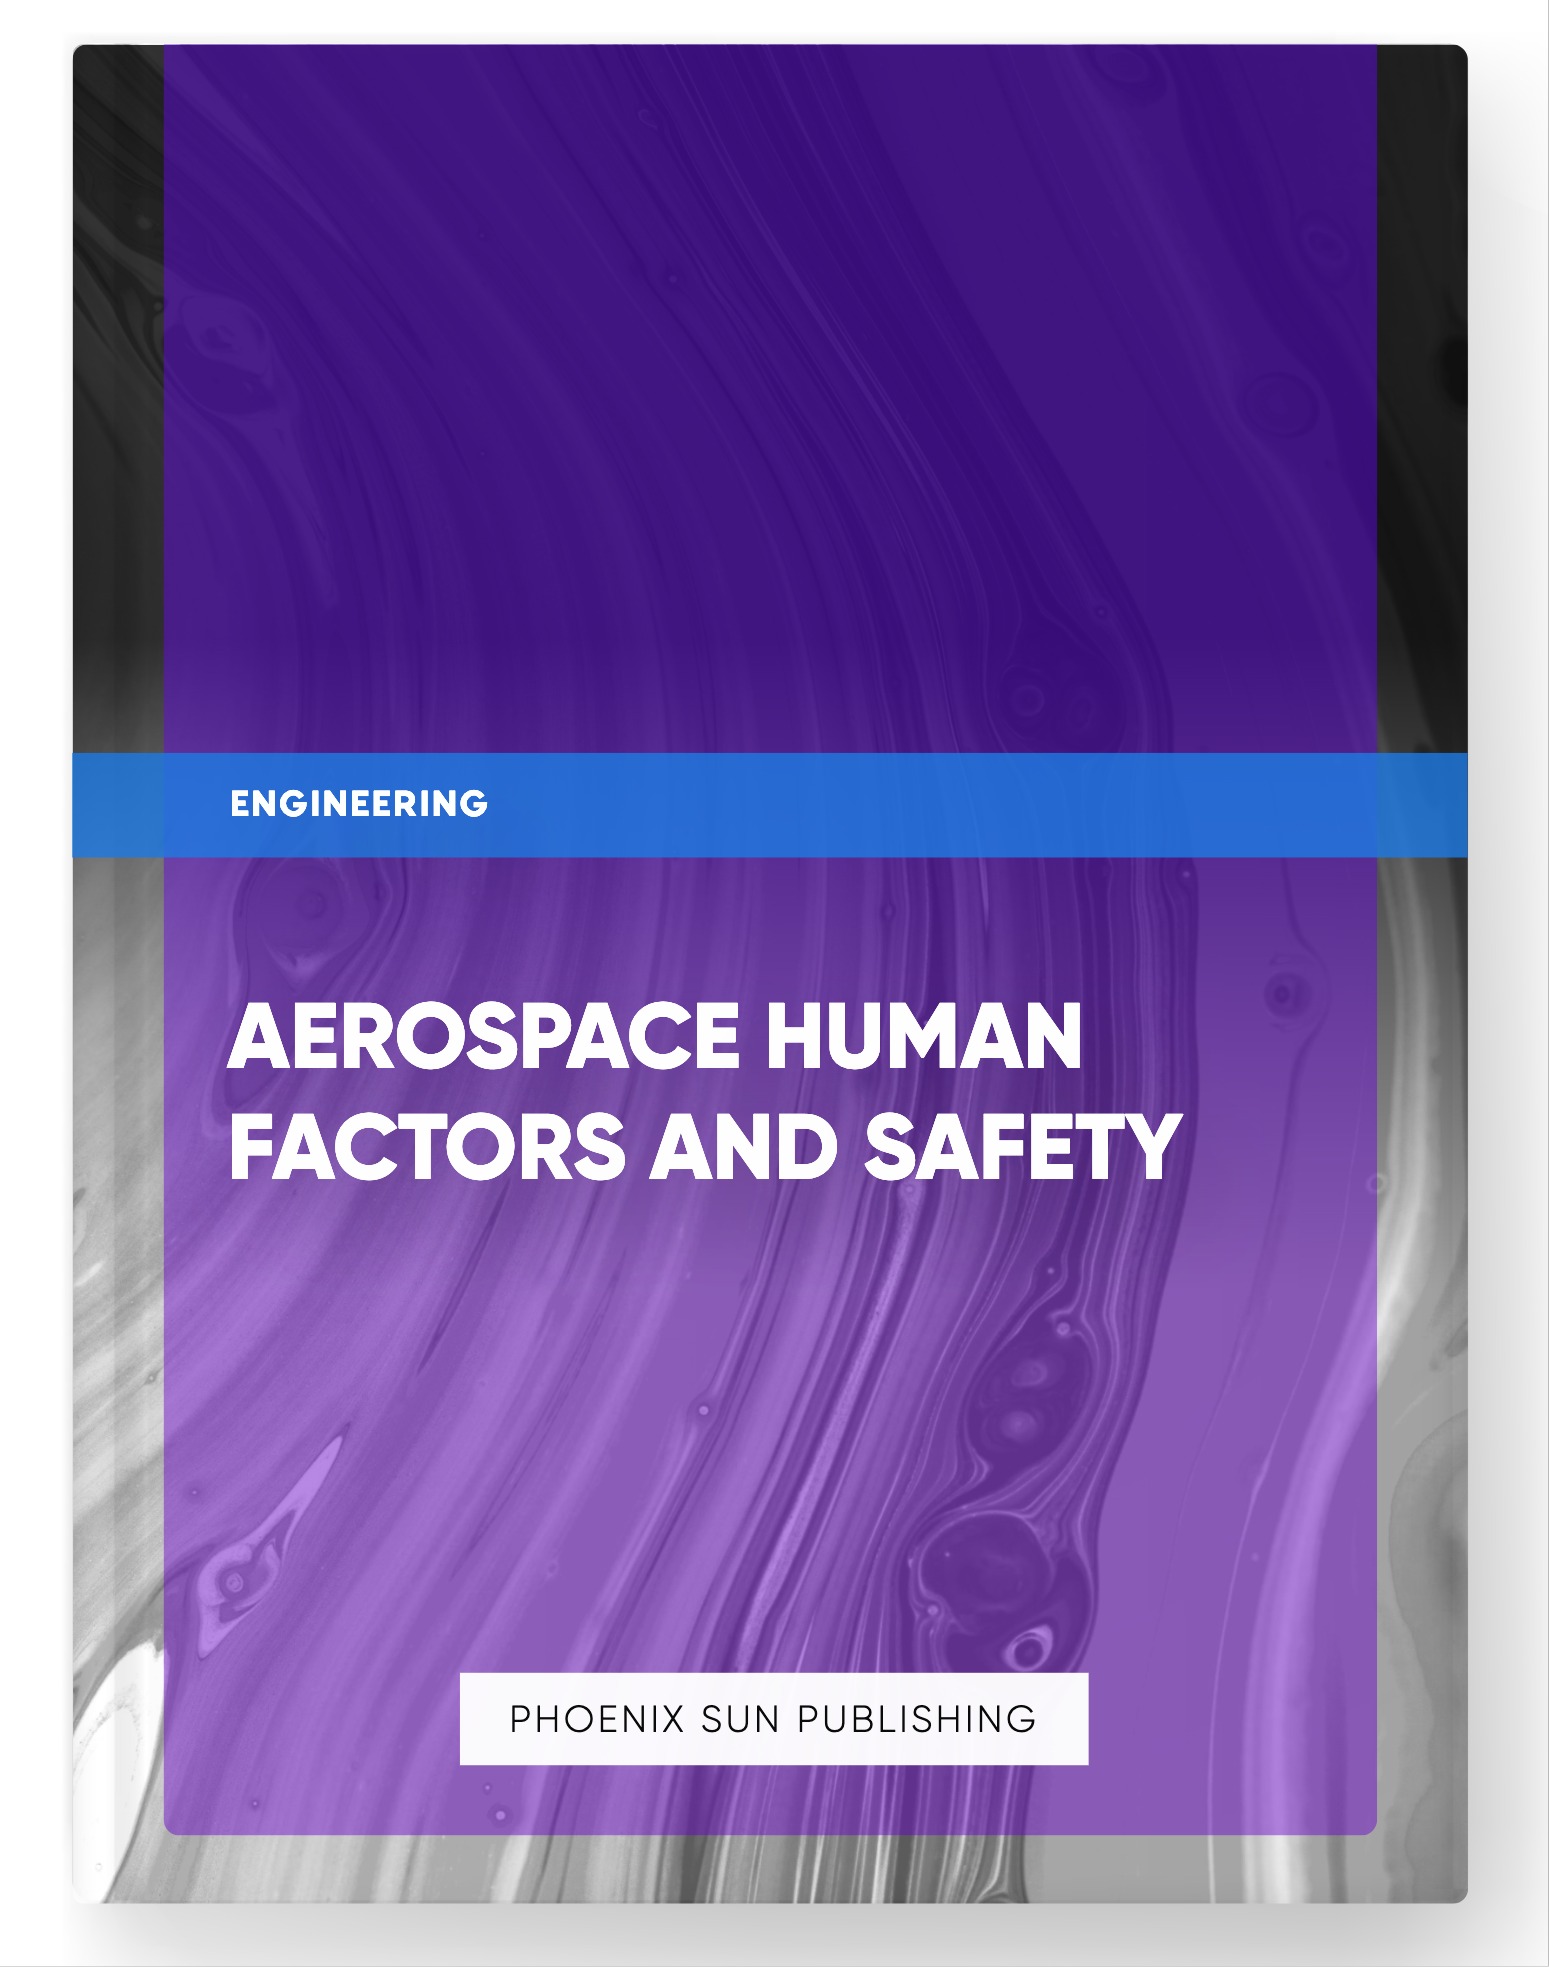 Aerospace Human Factors and Safety